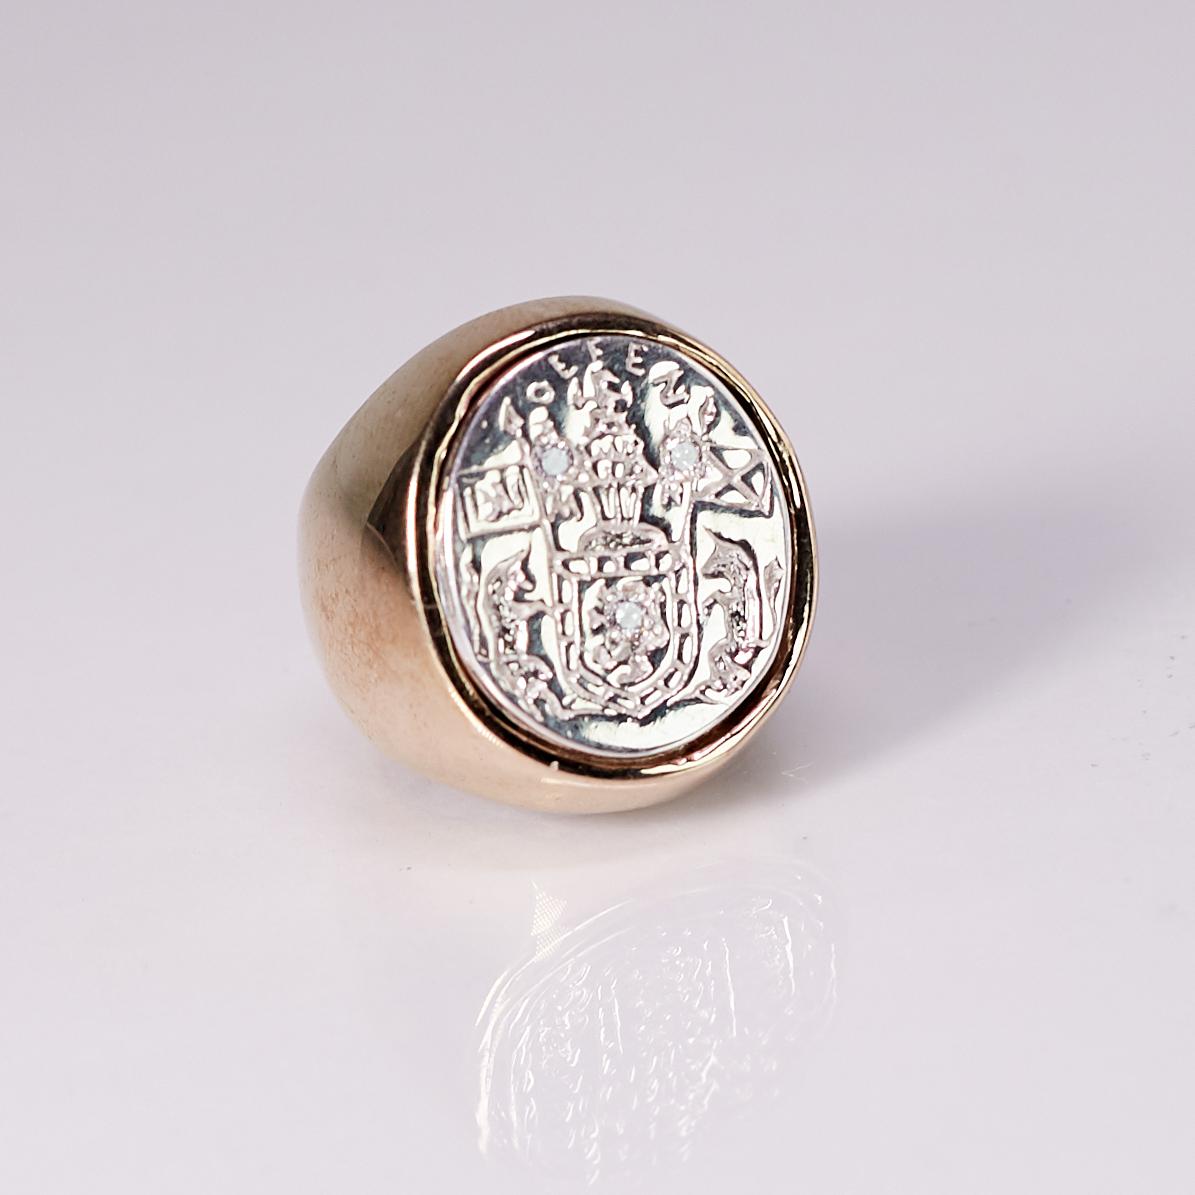 White Diamond Crest Signet Ring Sterling Silver Bronze J Dauphin can be worn by women or men.

Inspired by Queen Mary of Scots ring. Gold signet-ring; engraved; shoulders ornamented with flowers and leaves. Oval bezel set with silver intaglio